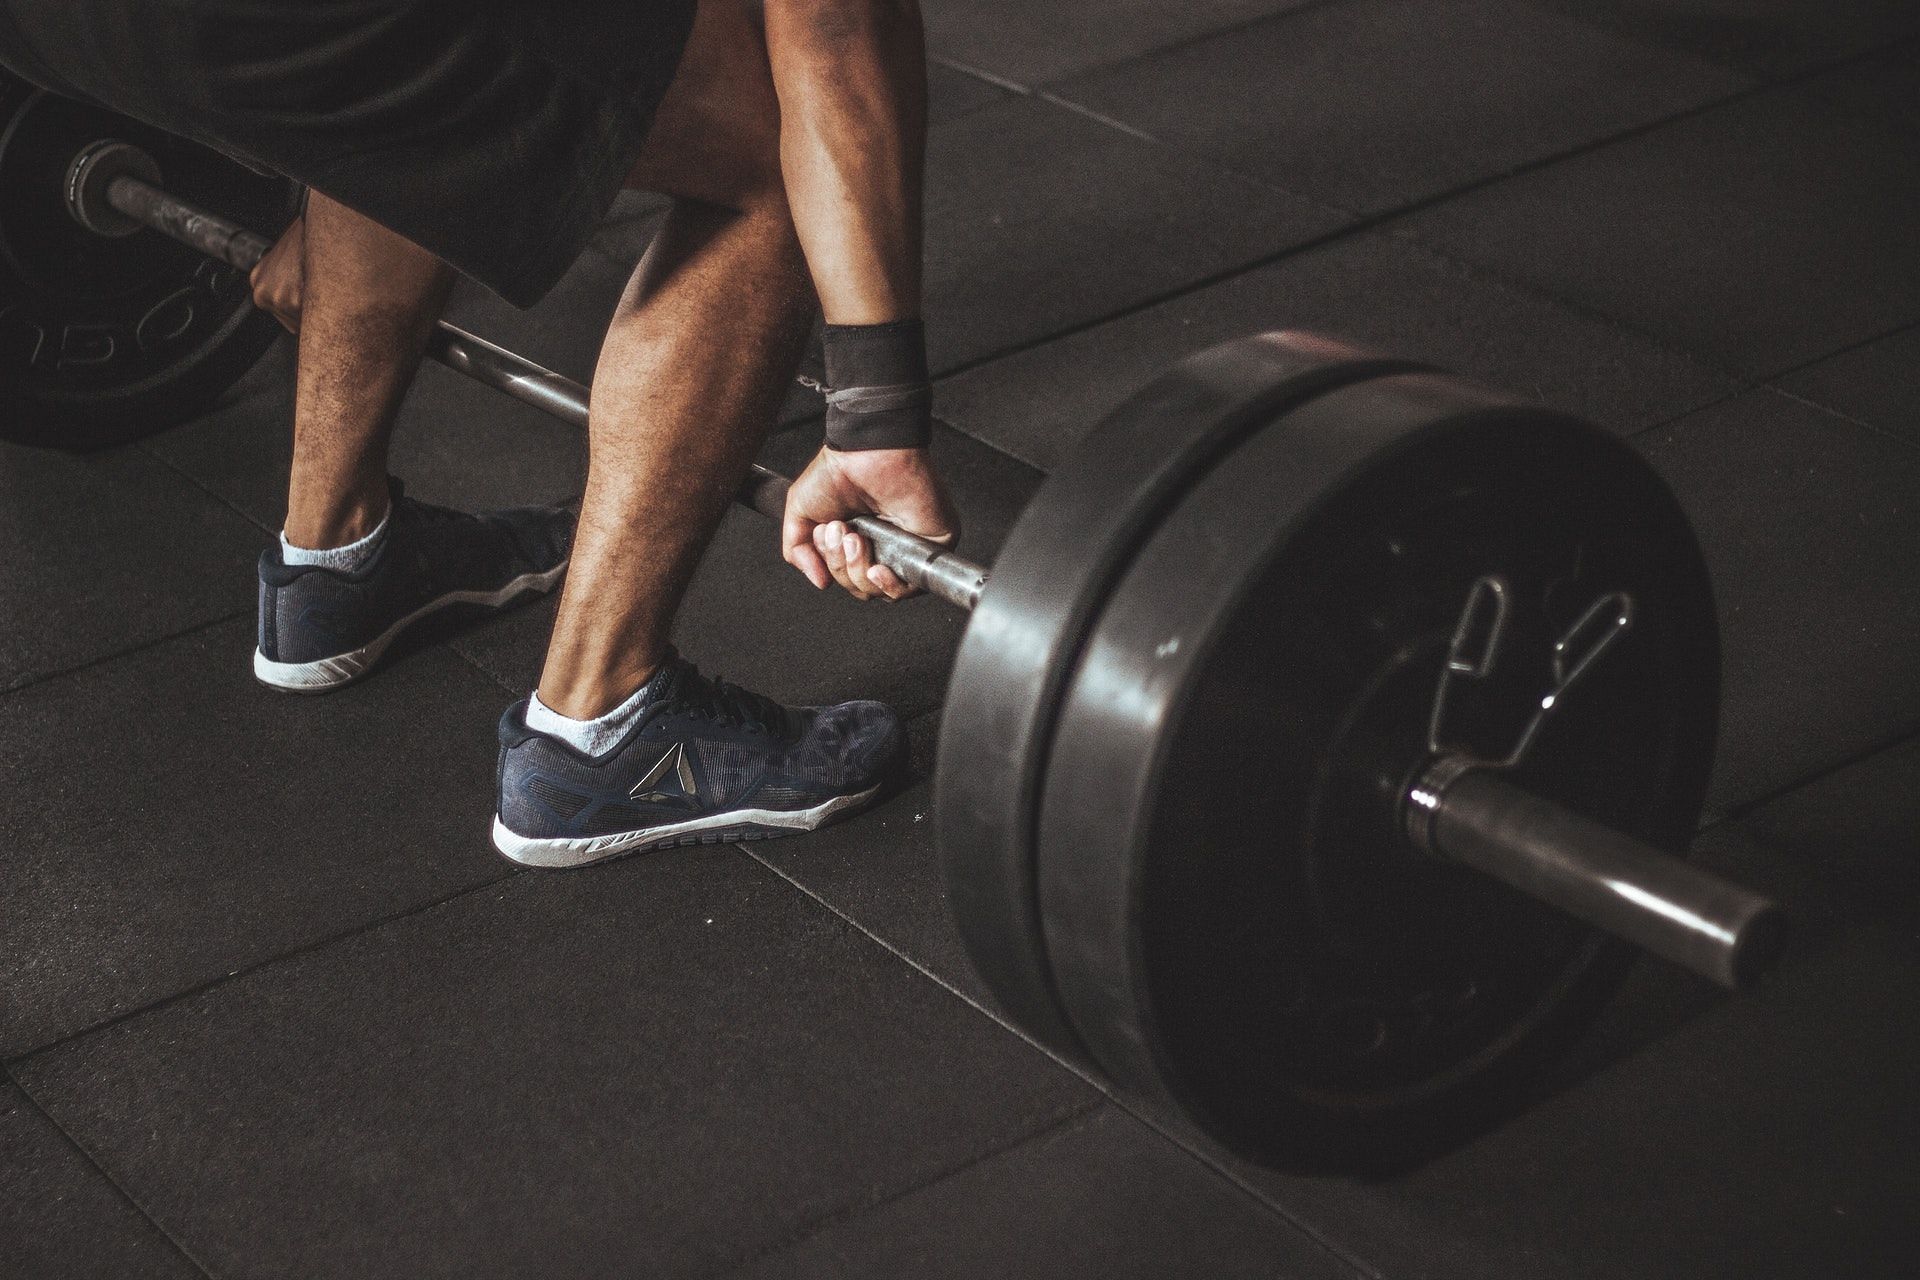 Barbell exercises increase strength and endurance. (Photo by Victor Freitas via pexels)